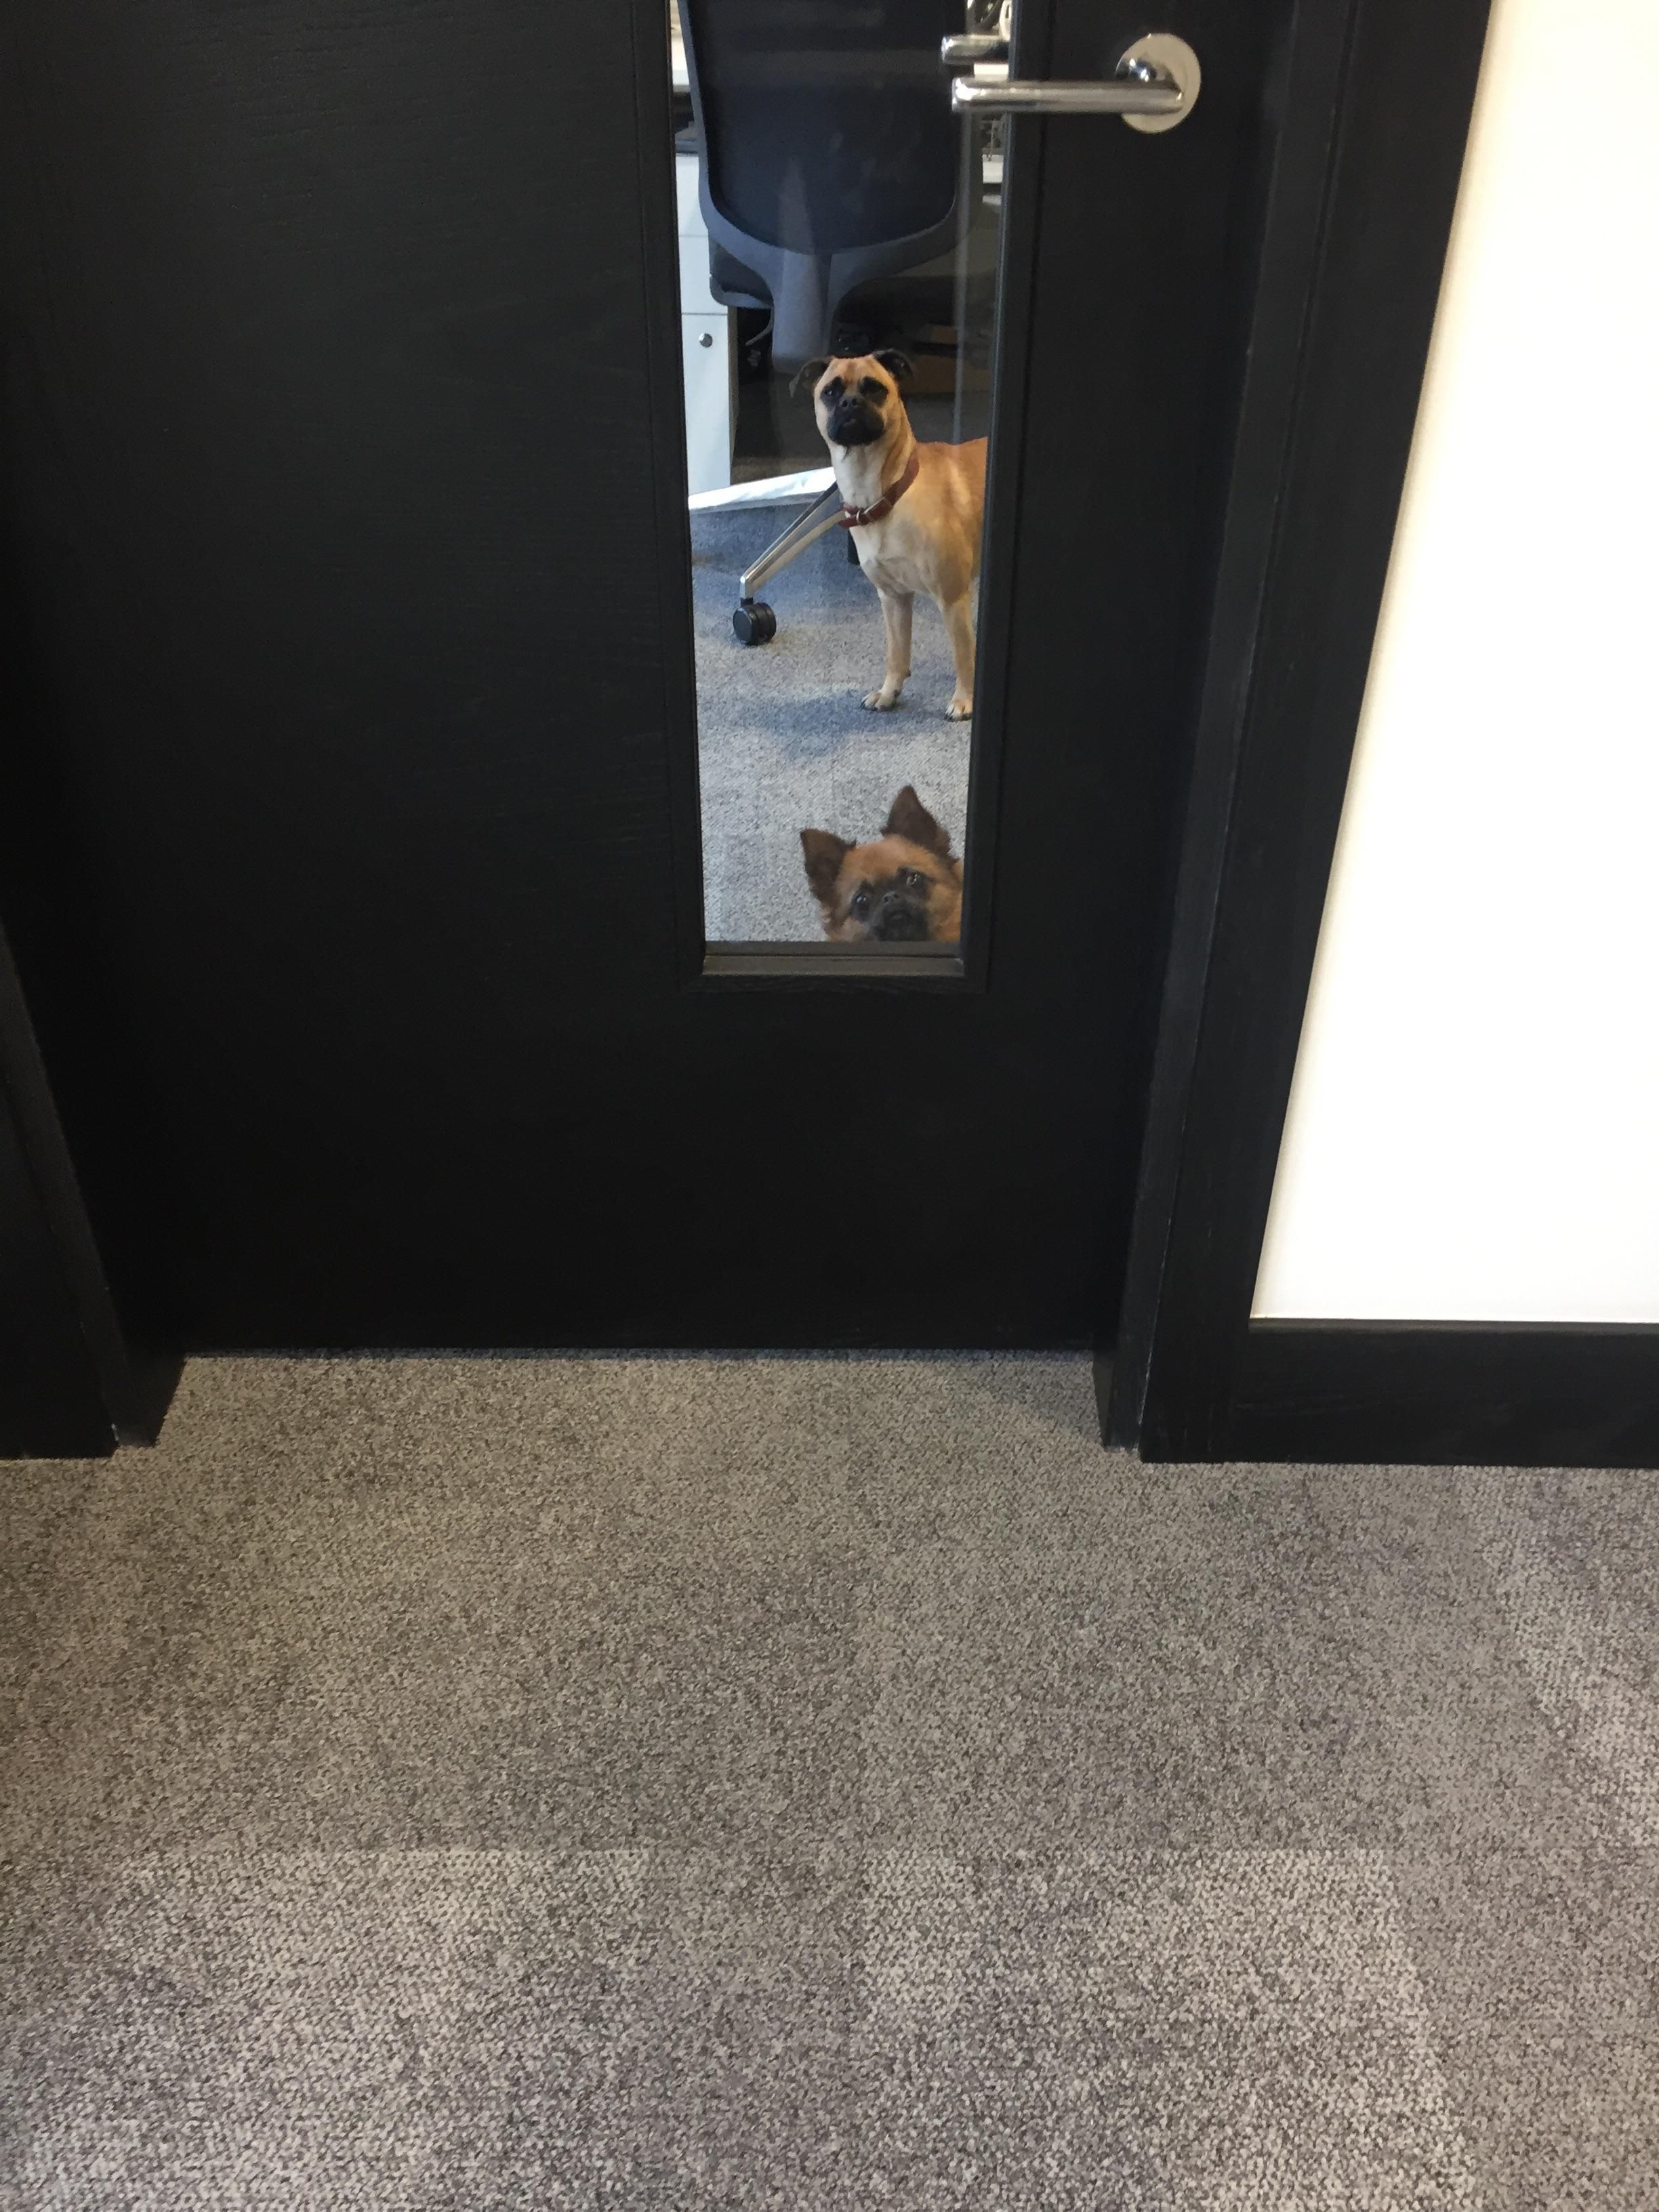 How I was greeted in the office one morning.